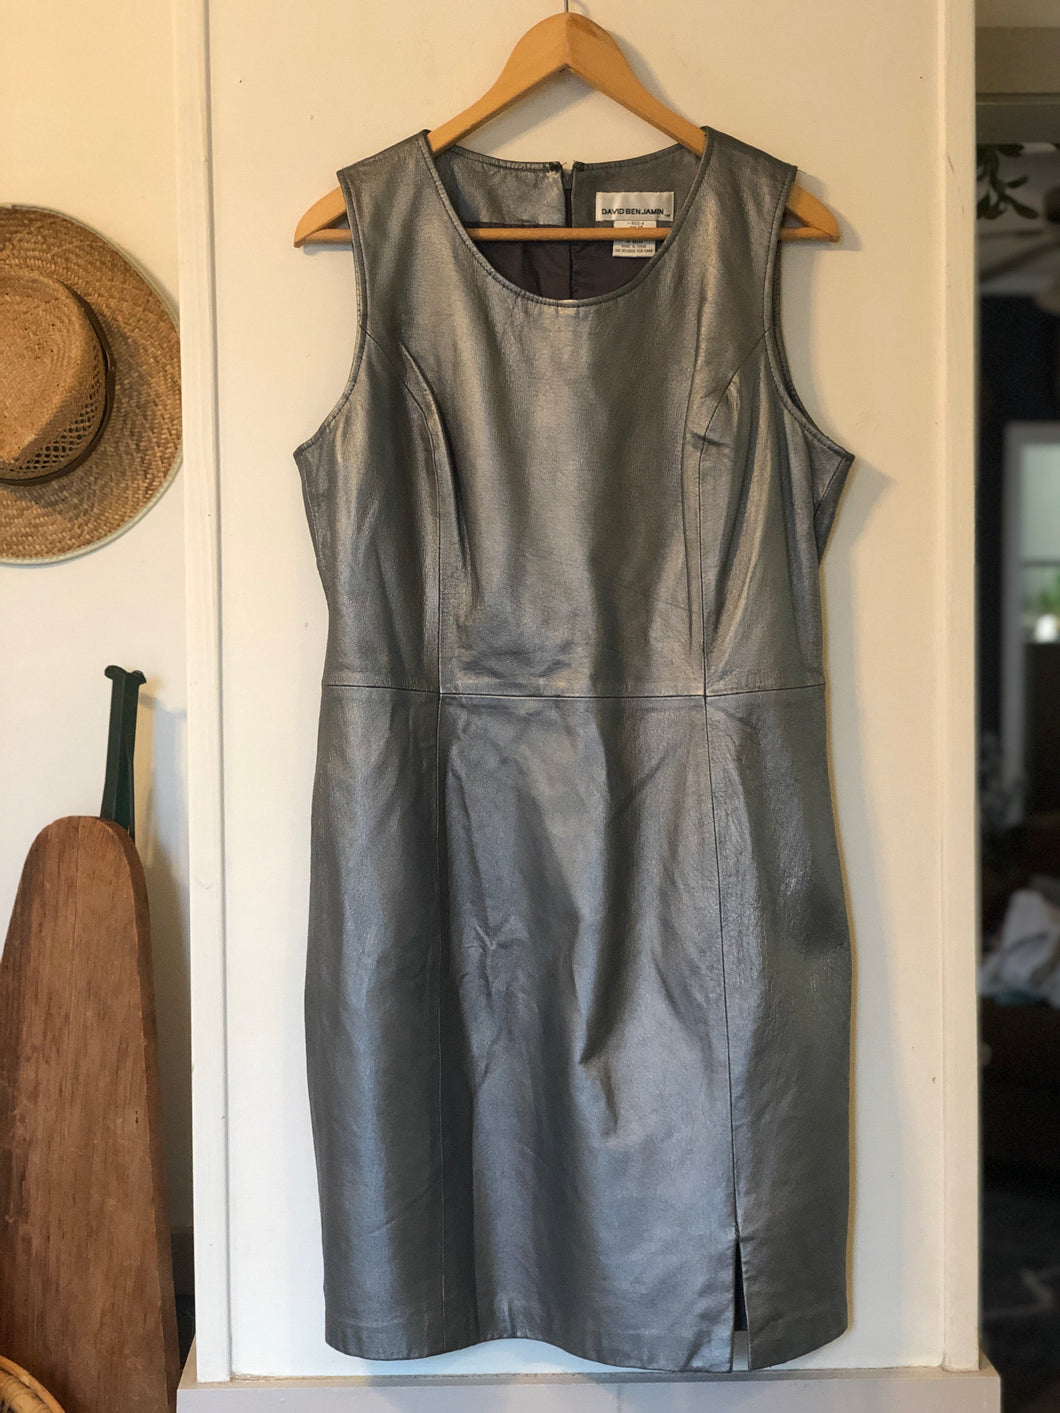 Silver Leather Dress